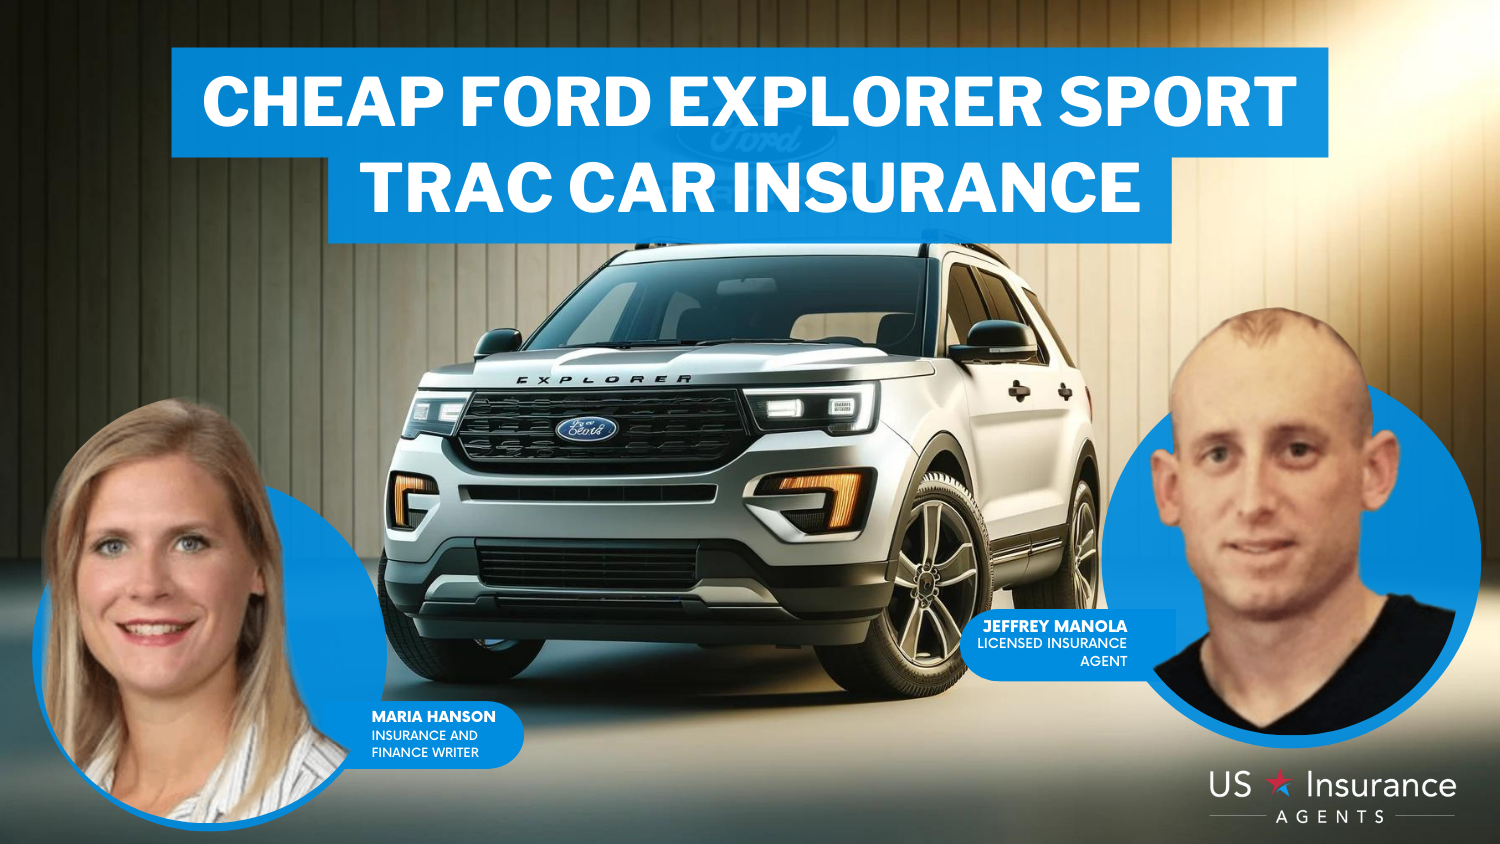 Cheap Ford Explorer Sport Trac Car Insurance: State Farm, Auto-Owners, and Erie